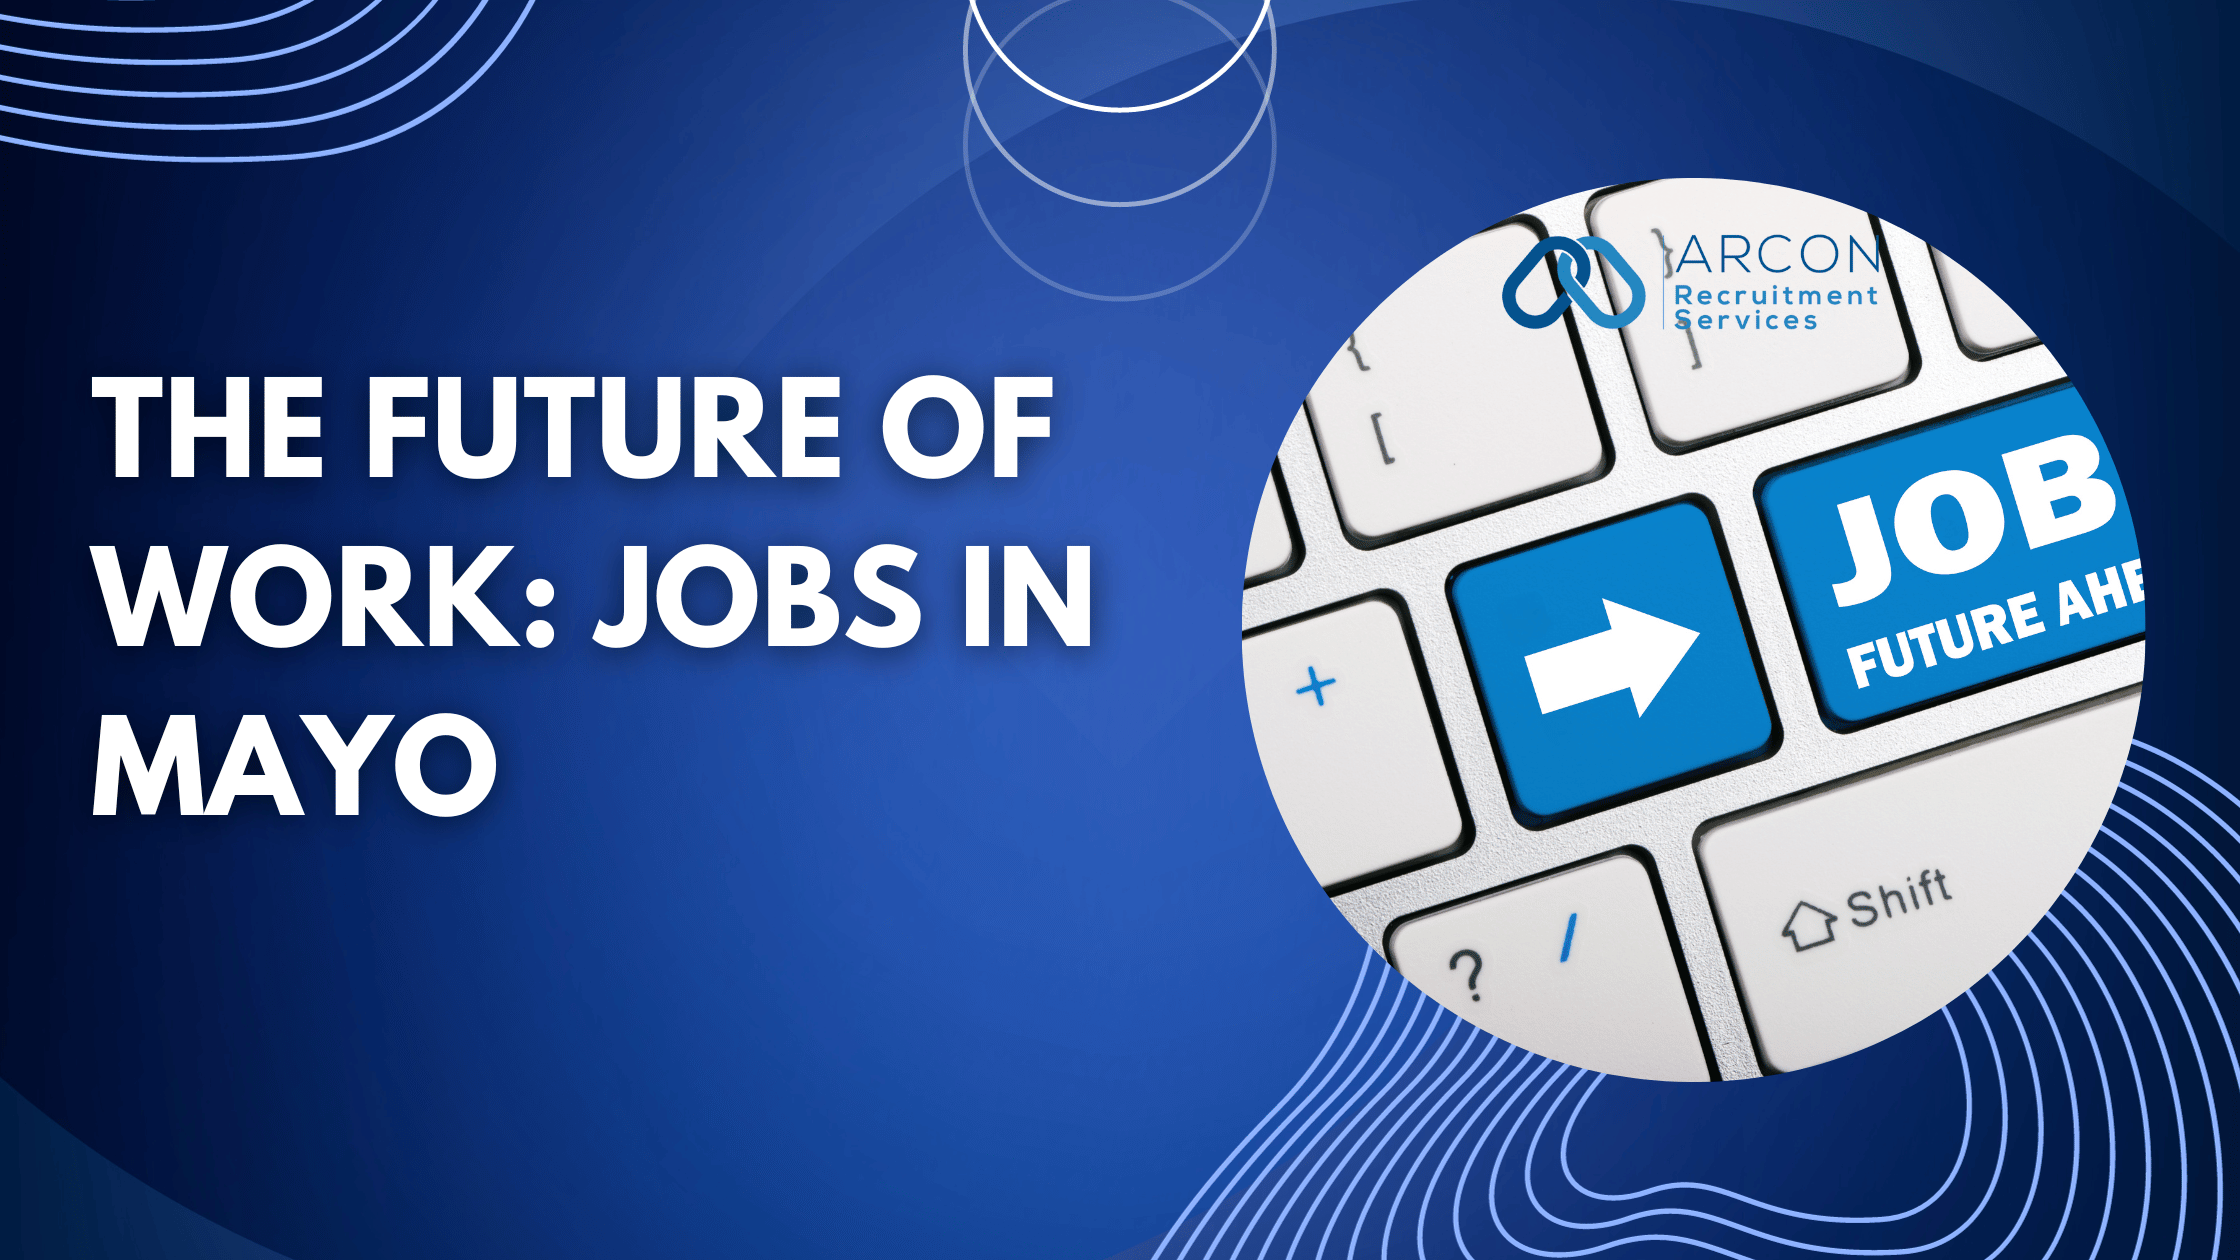 The Future of Work: Jobs in Mayo